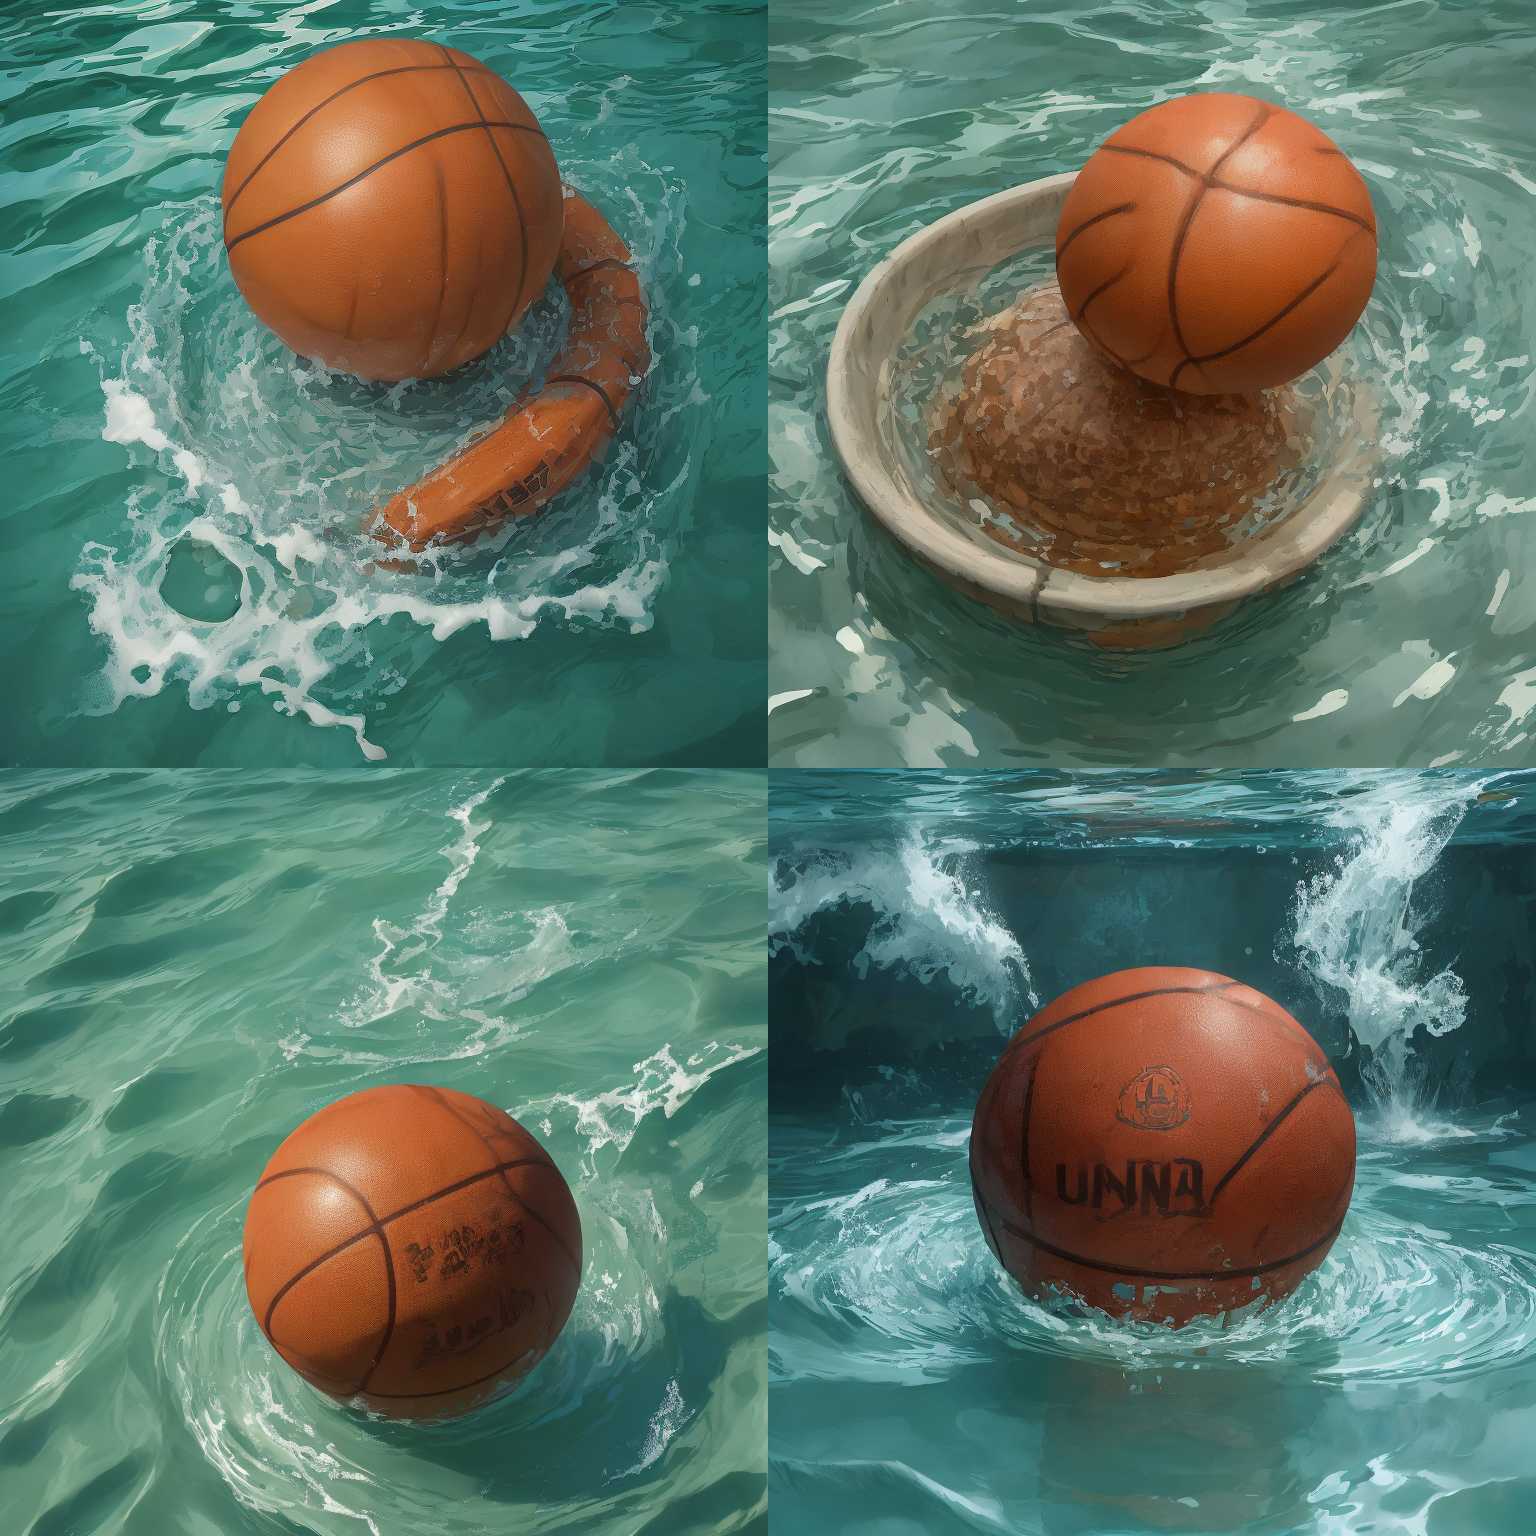 A basketball in water